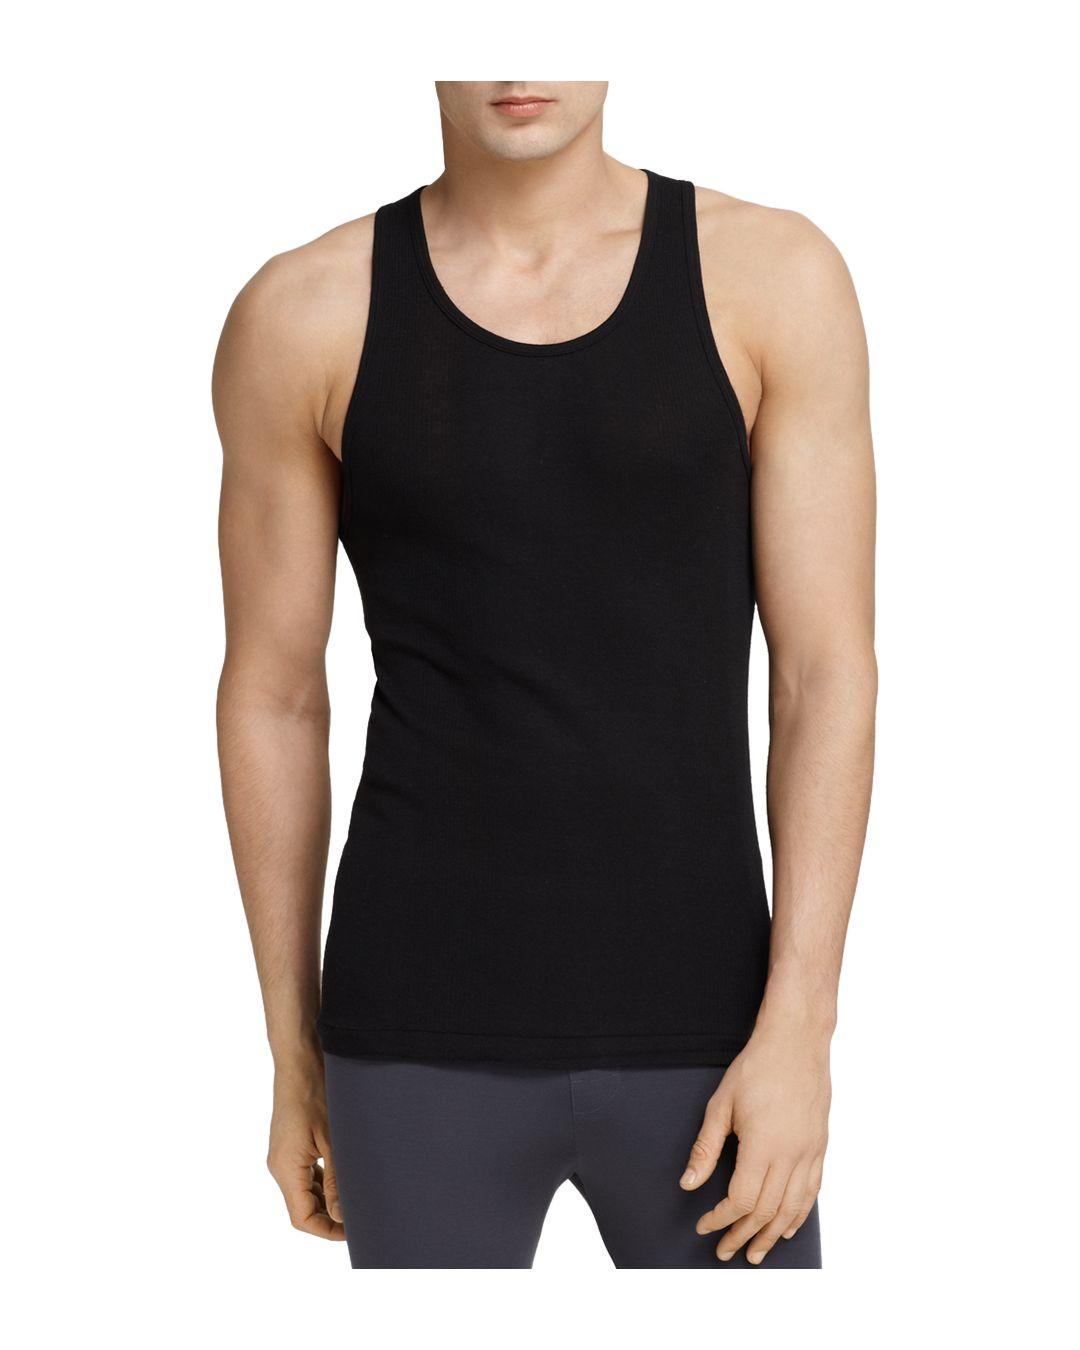 2xist 2(x)ist Ribbed Tank in Black for Men - Lyst